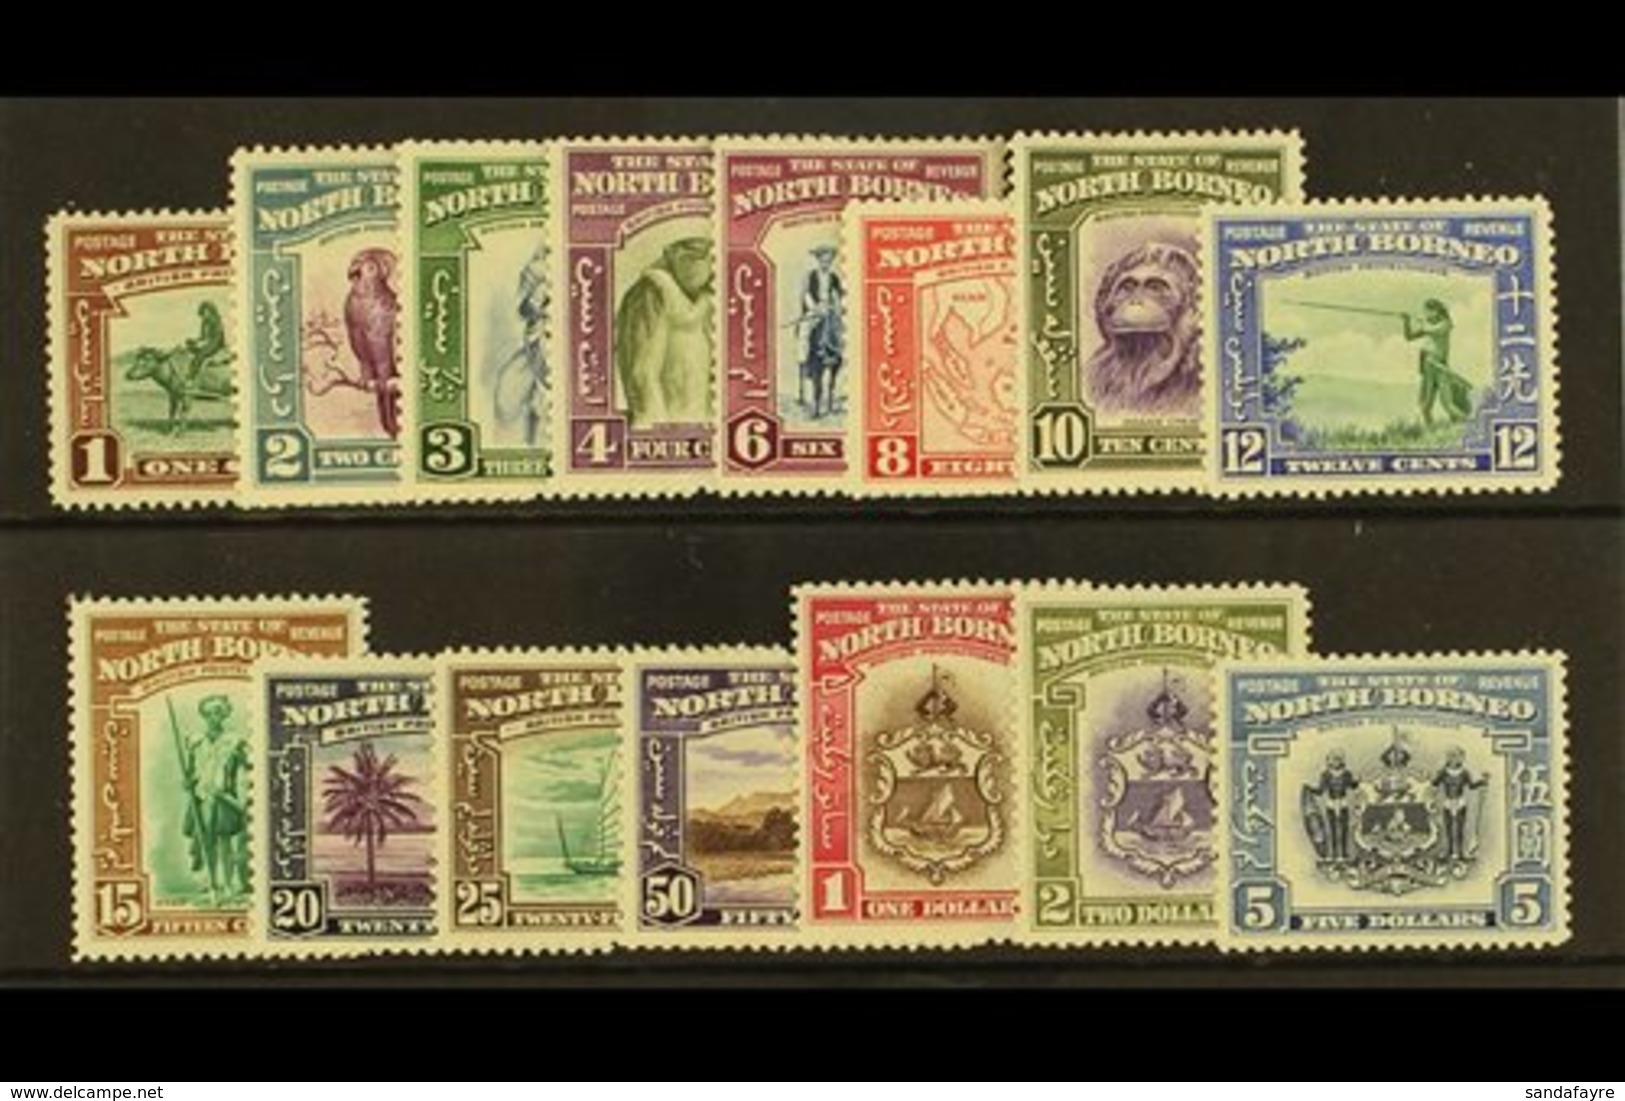 1939 Pictorial Set Complete, SG 303/17, Very Fine And Fresh Mint. Scarce Set. (`5 Stamps) For More Images, Please Visit  - Borneo Septentrional (...-1963)